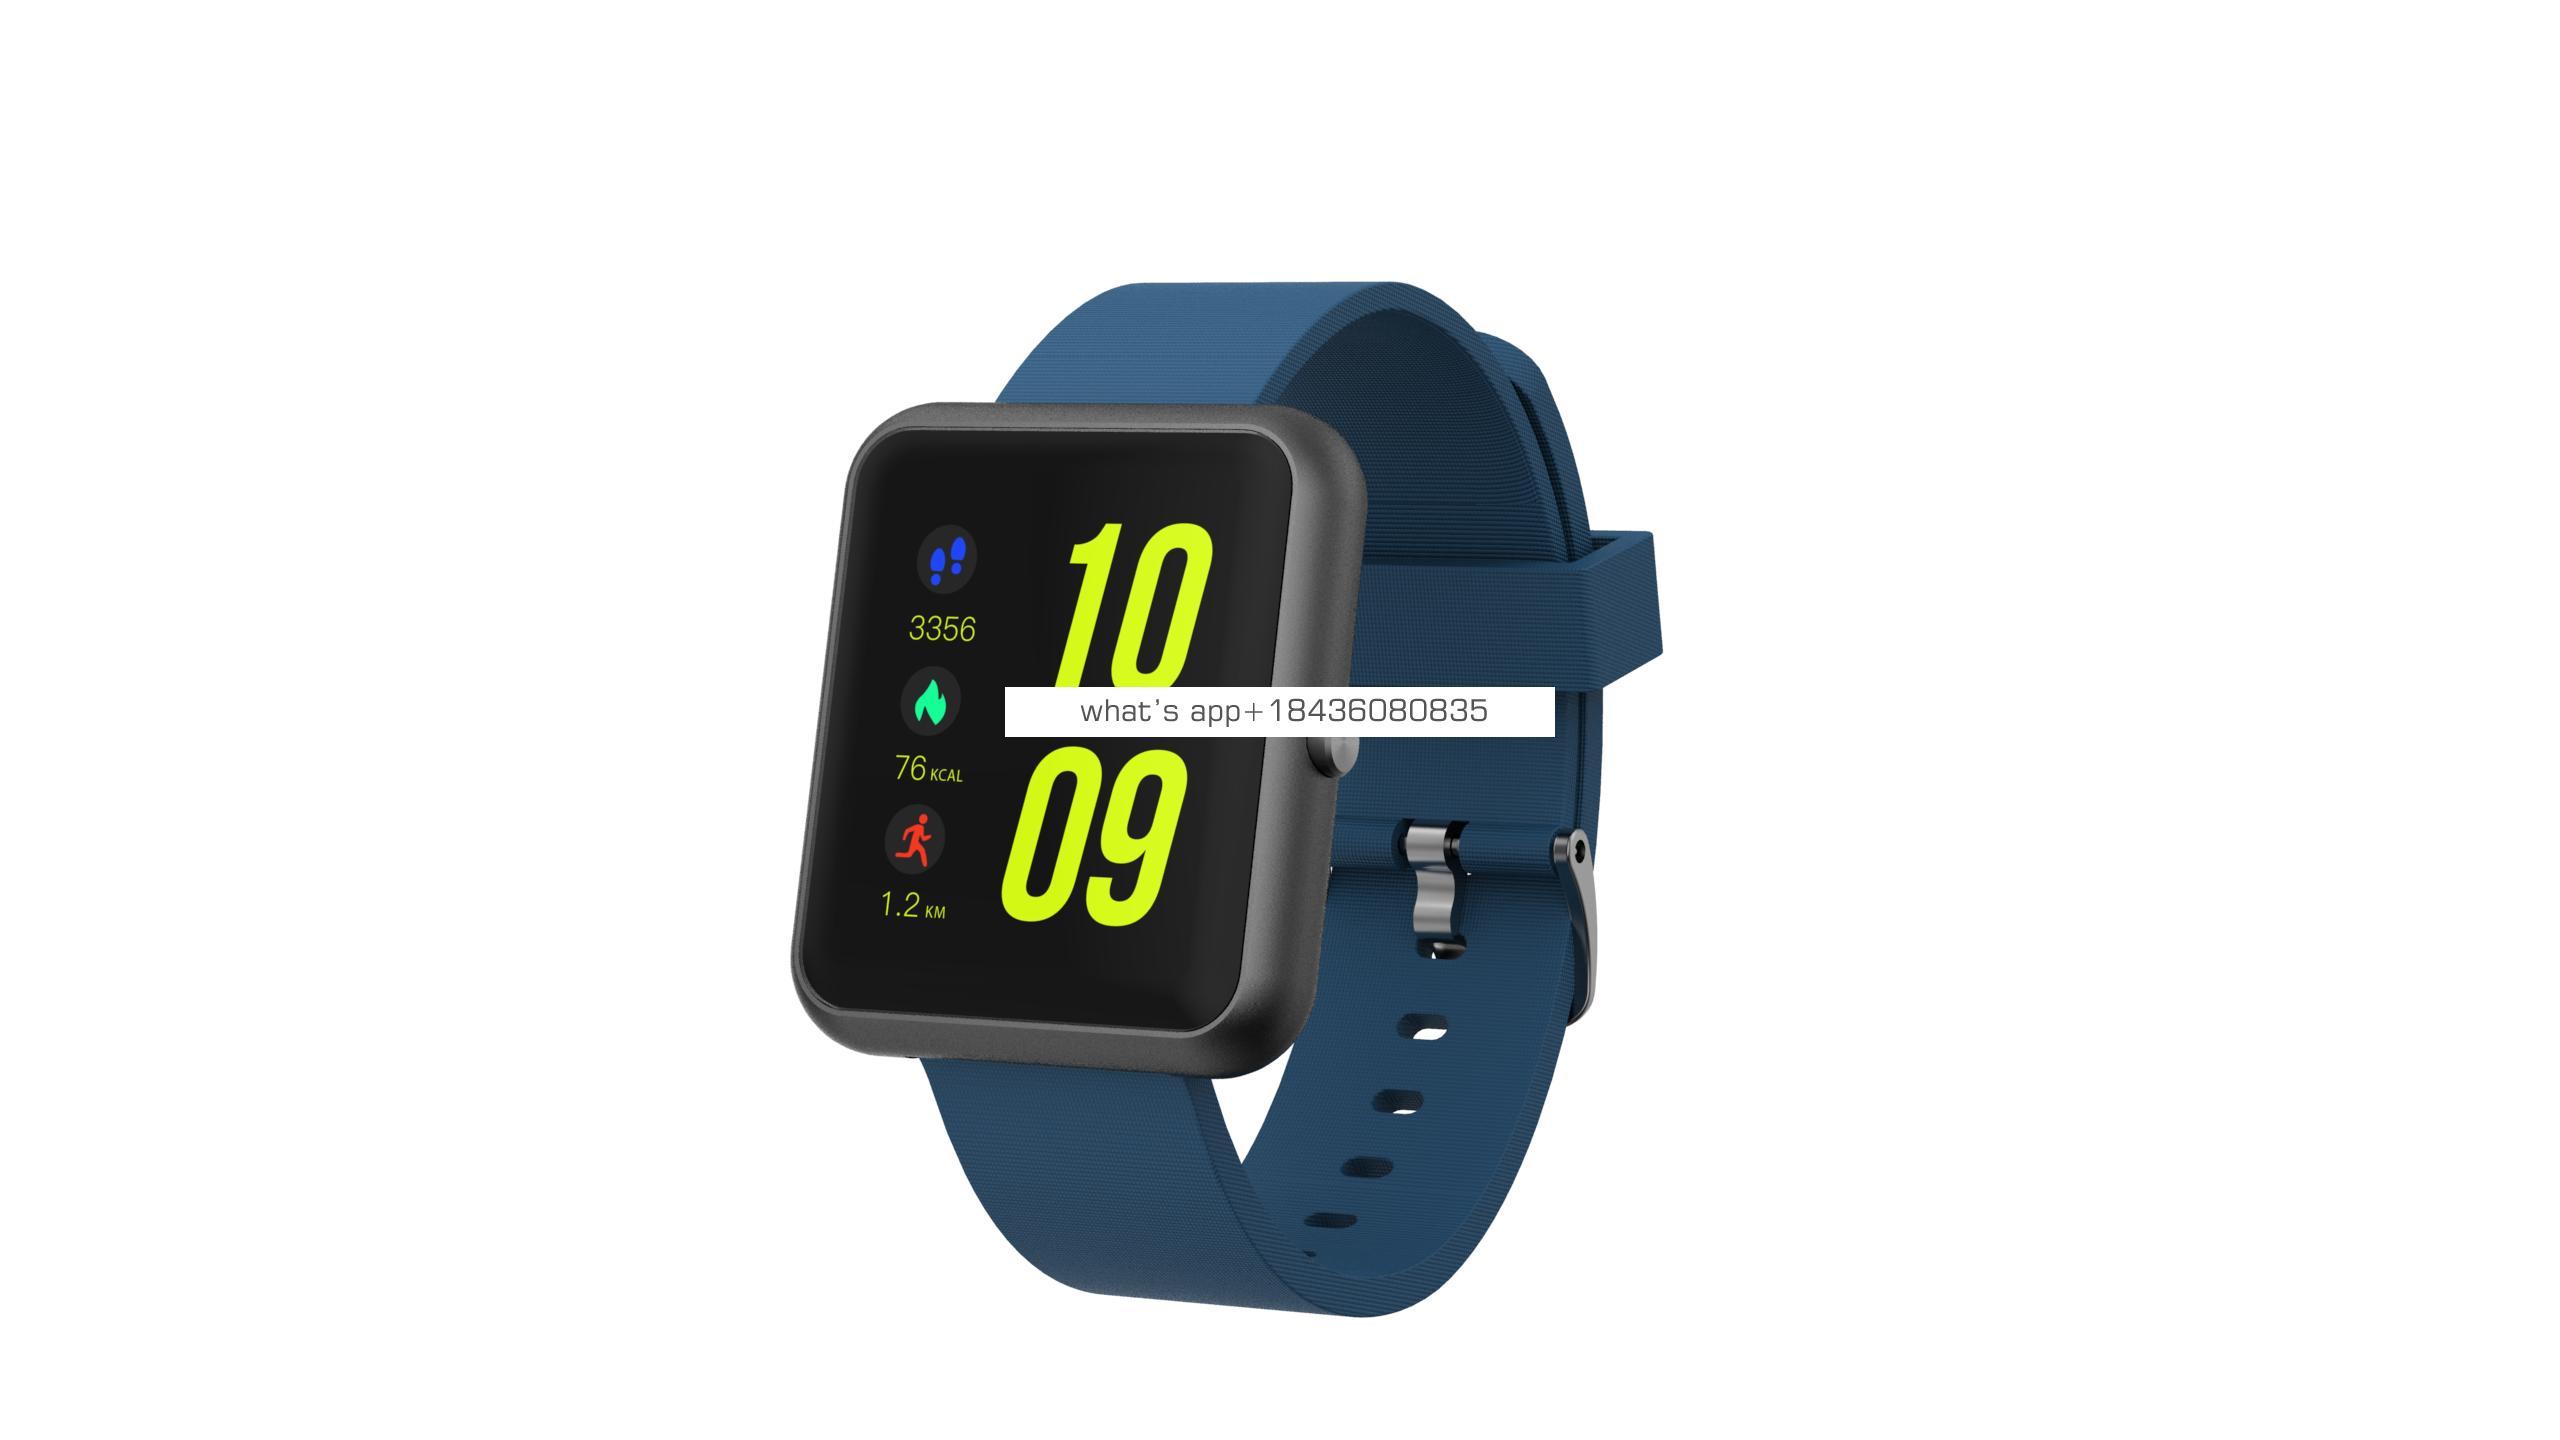 Newest popular sport waterproof  smartwatch android call  heart rate monitor smartwatch